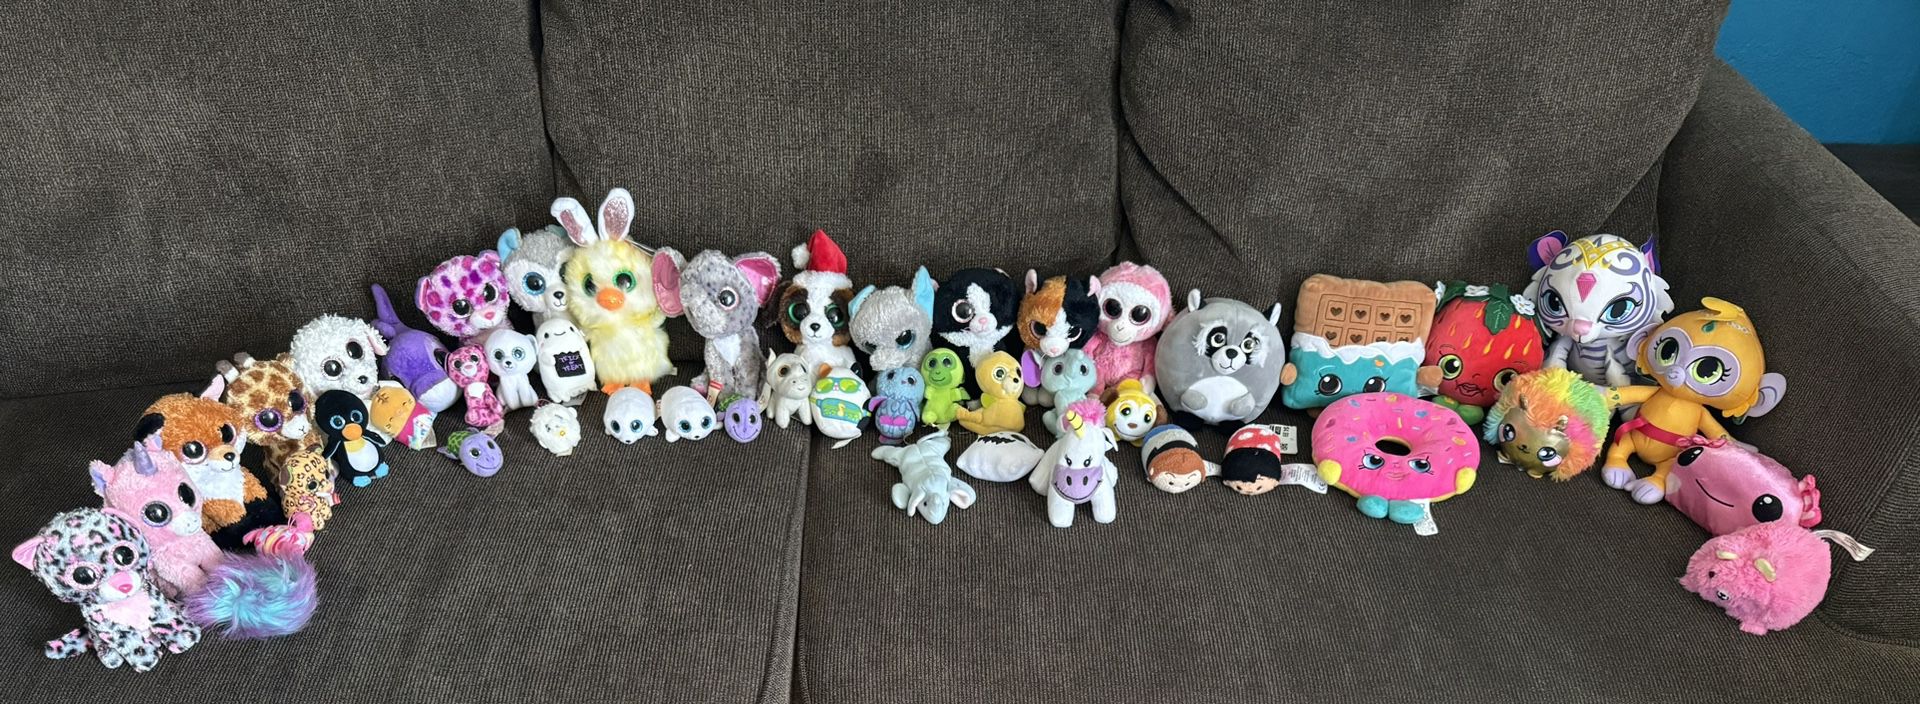 50 Pcs Of Plushies TY And Shopkings 